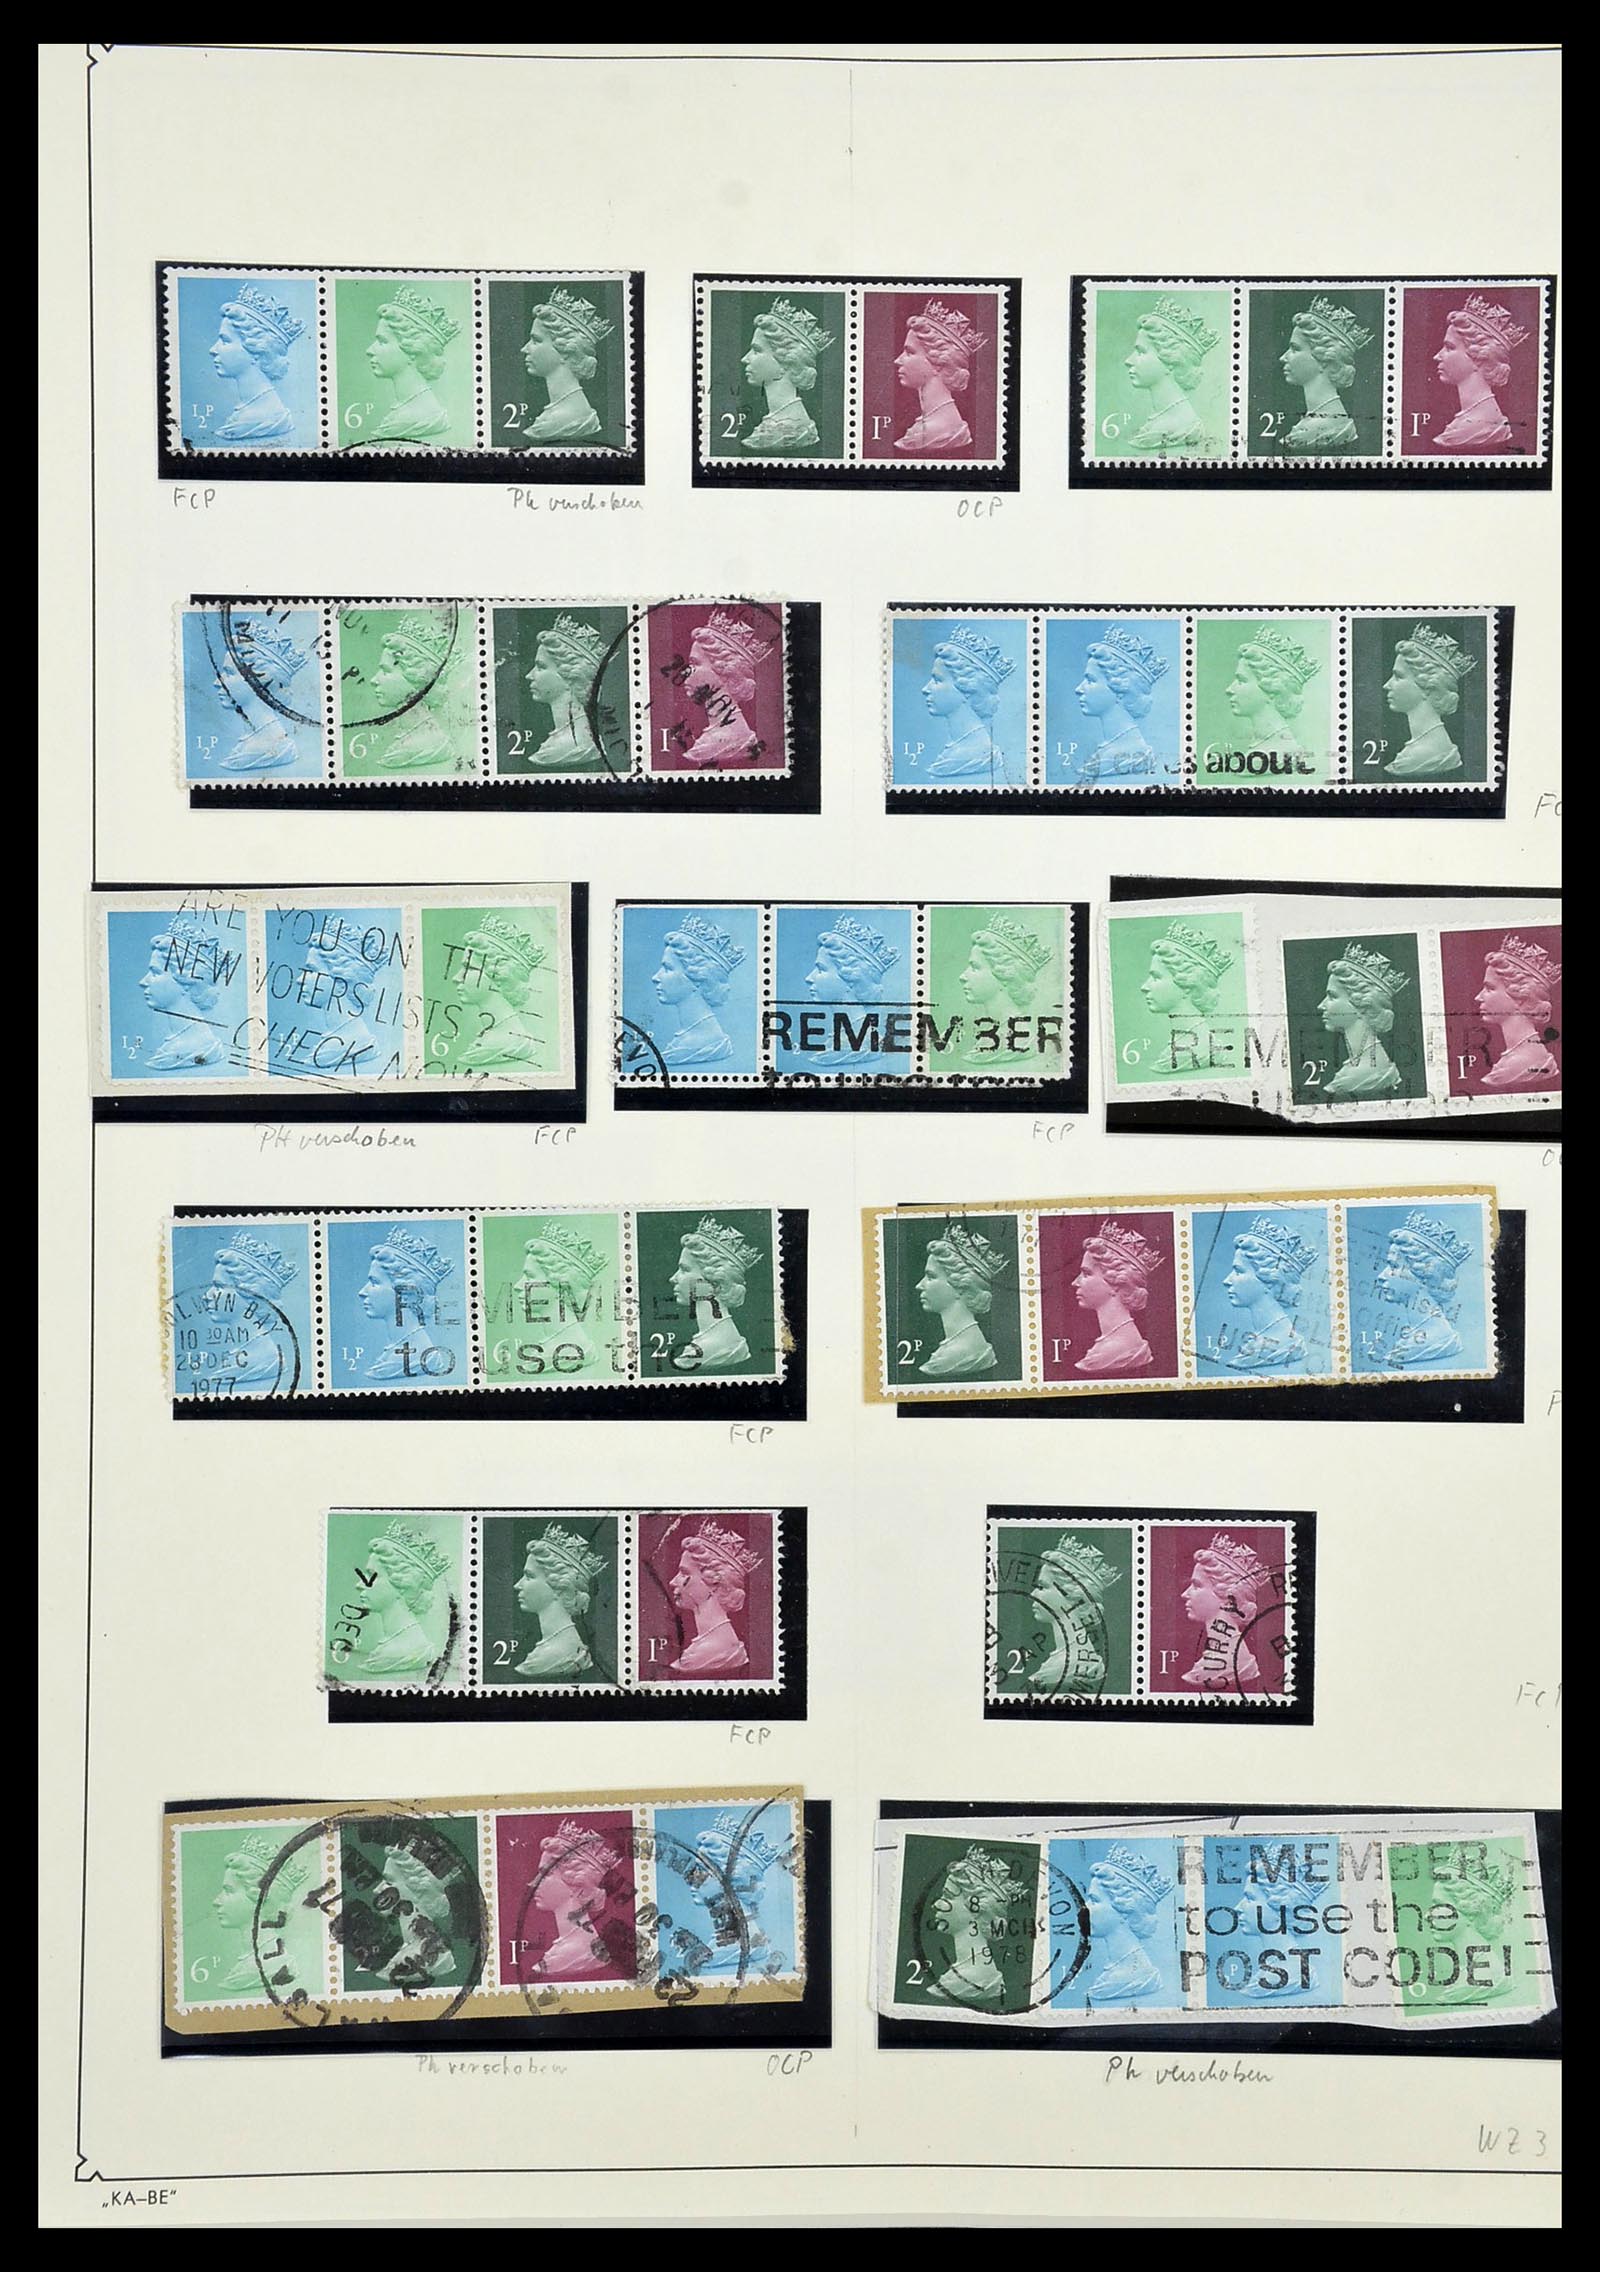 34221 186 - Stamp collection 34221 Great Britain Machins/castles 1971-2005.